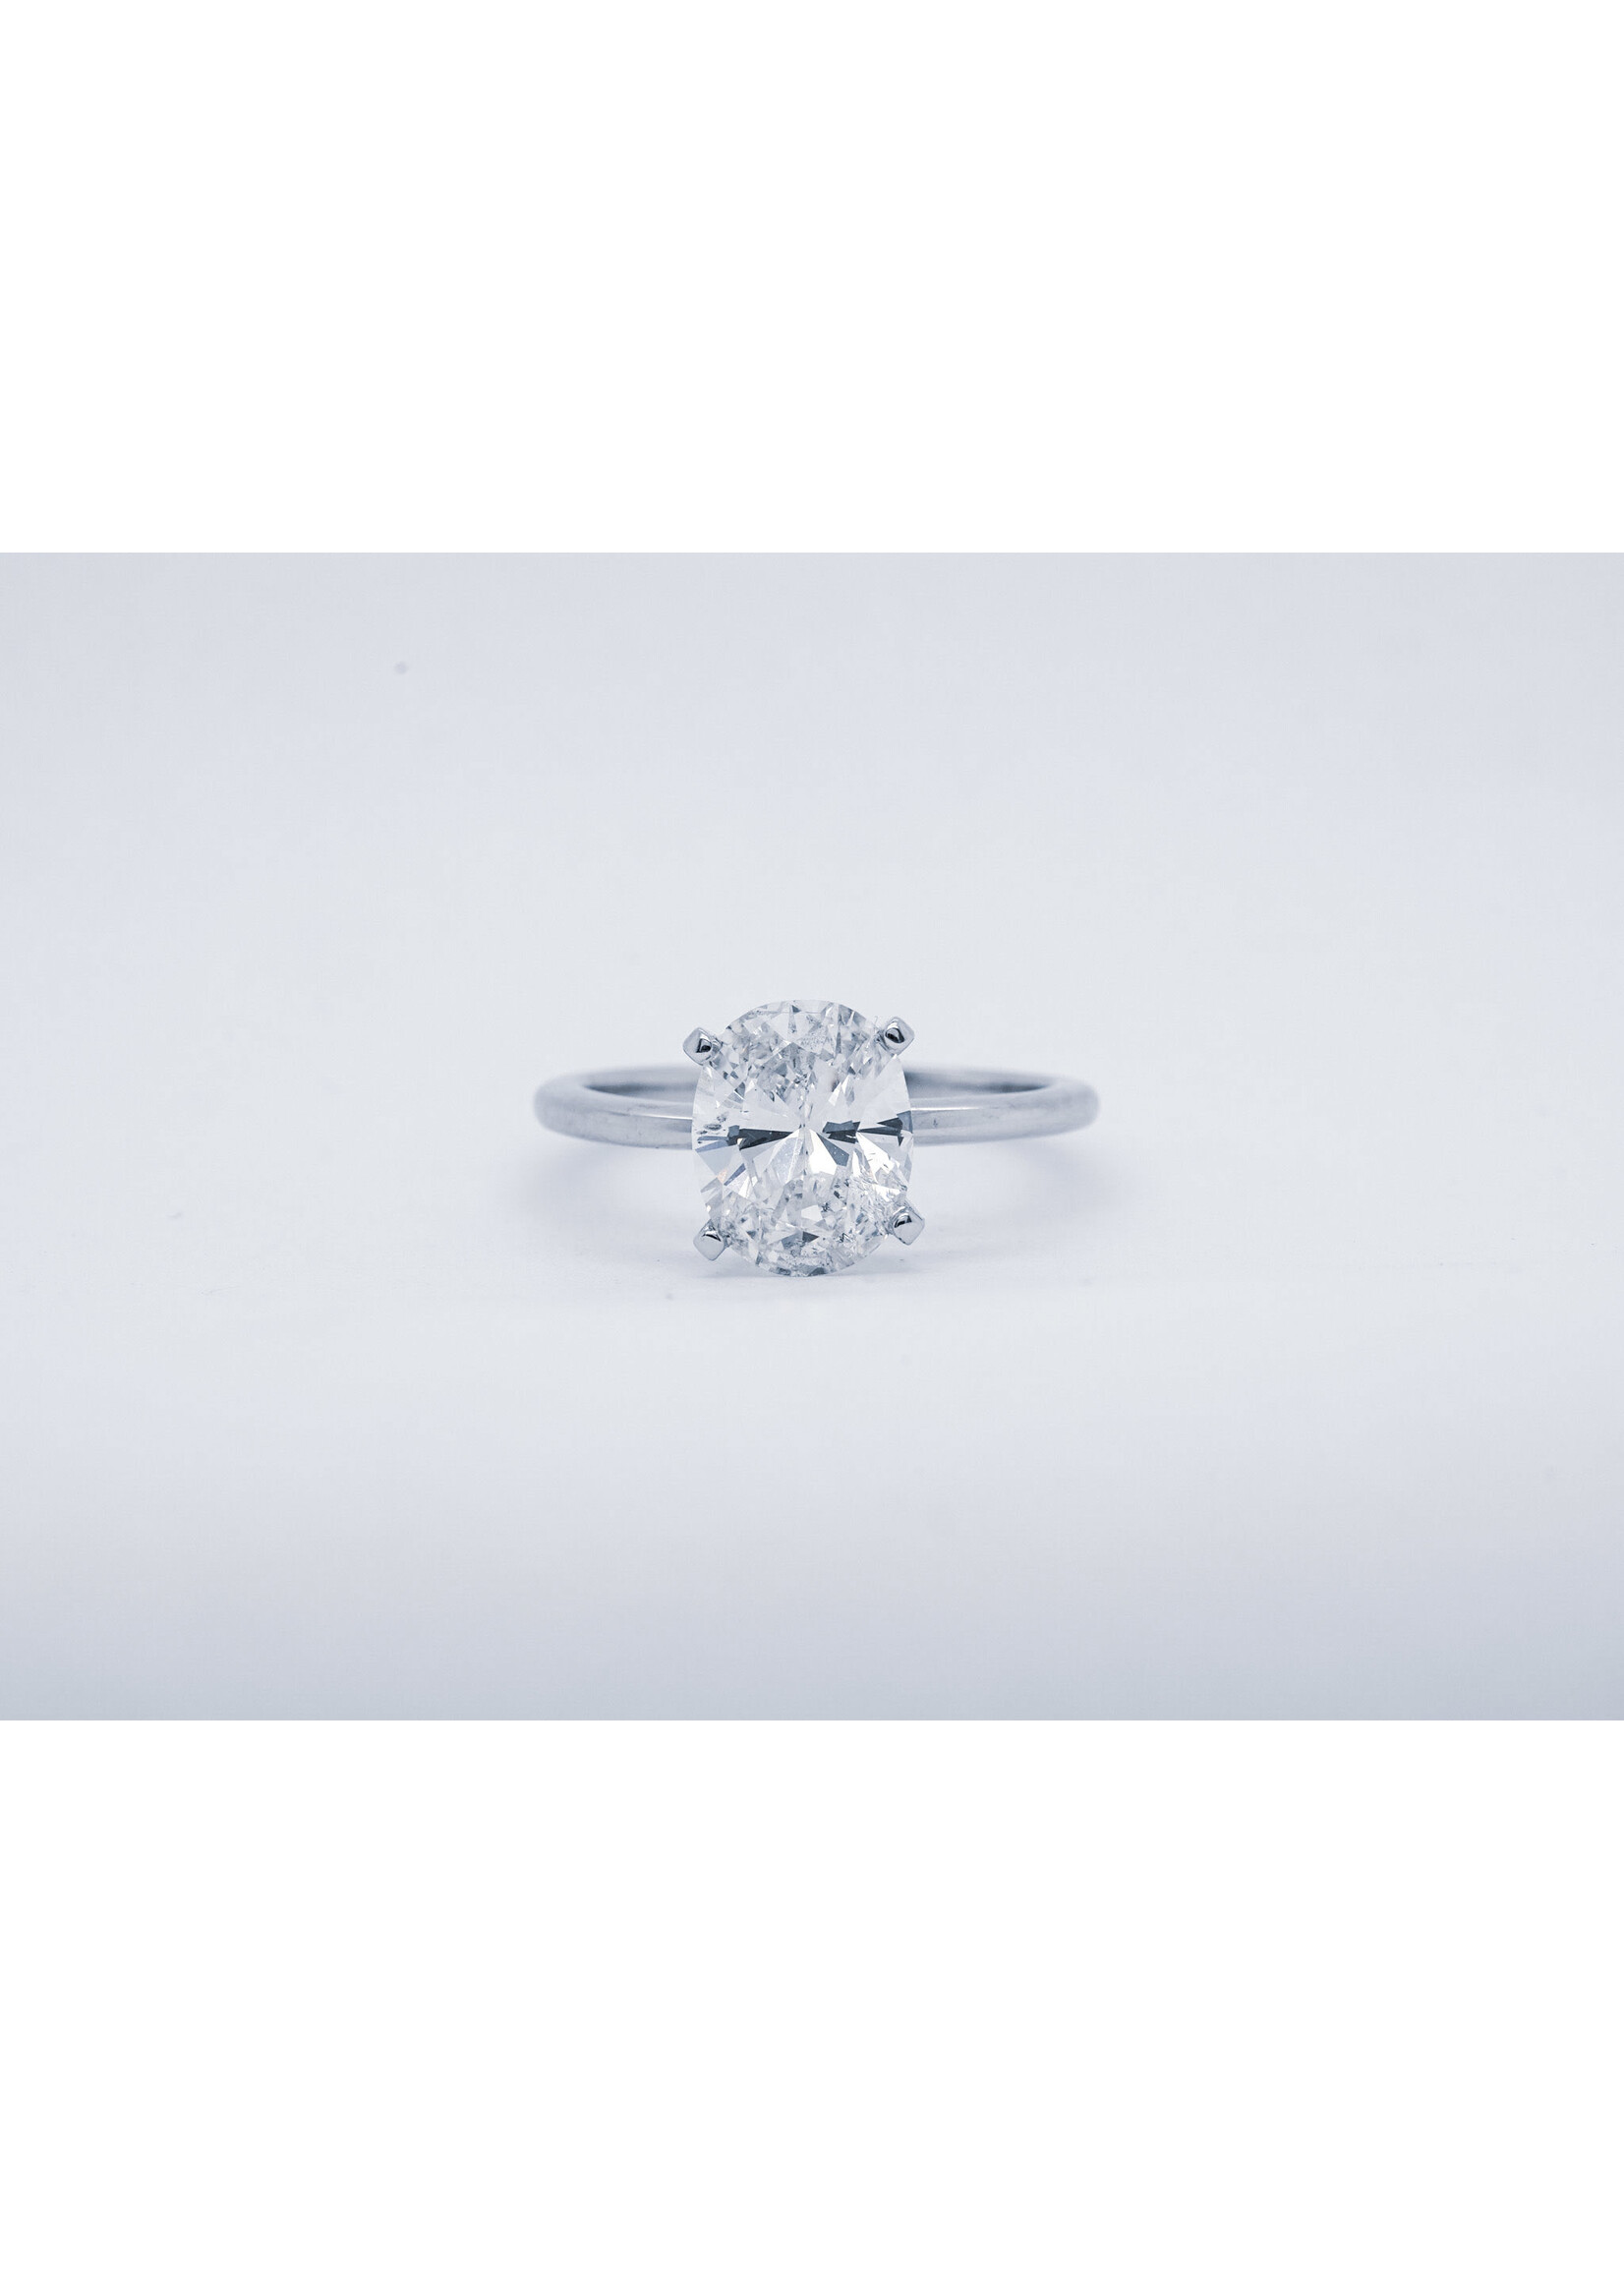 14KW 3.41g 2.42ctw (2.42ctr) G/SI2 Oval Diamond Solitaire Engagement Ring (size 7.5)